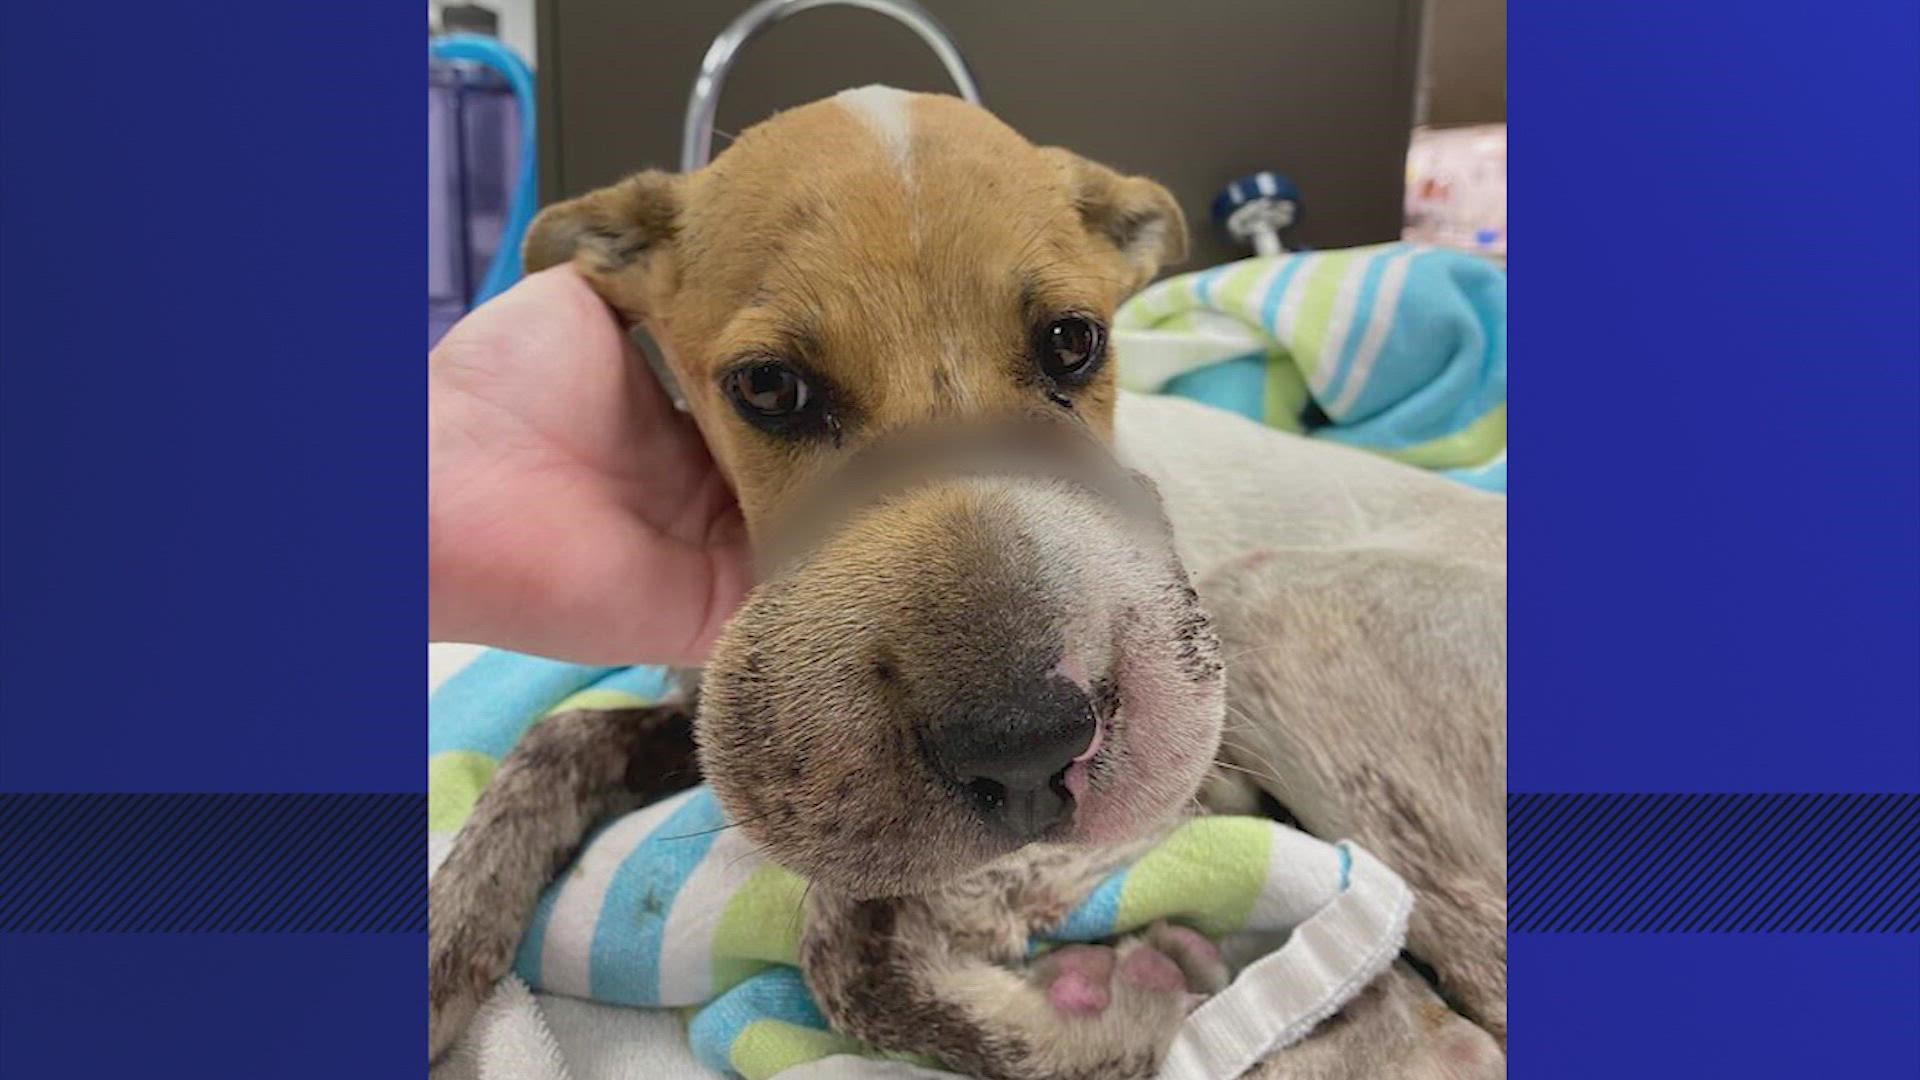 The SPCA said someone tightly wrapped a hair tie around the snout of a chihuahua mix puppy, causing severe swelling and a deep laceration to the bone.